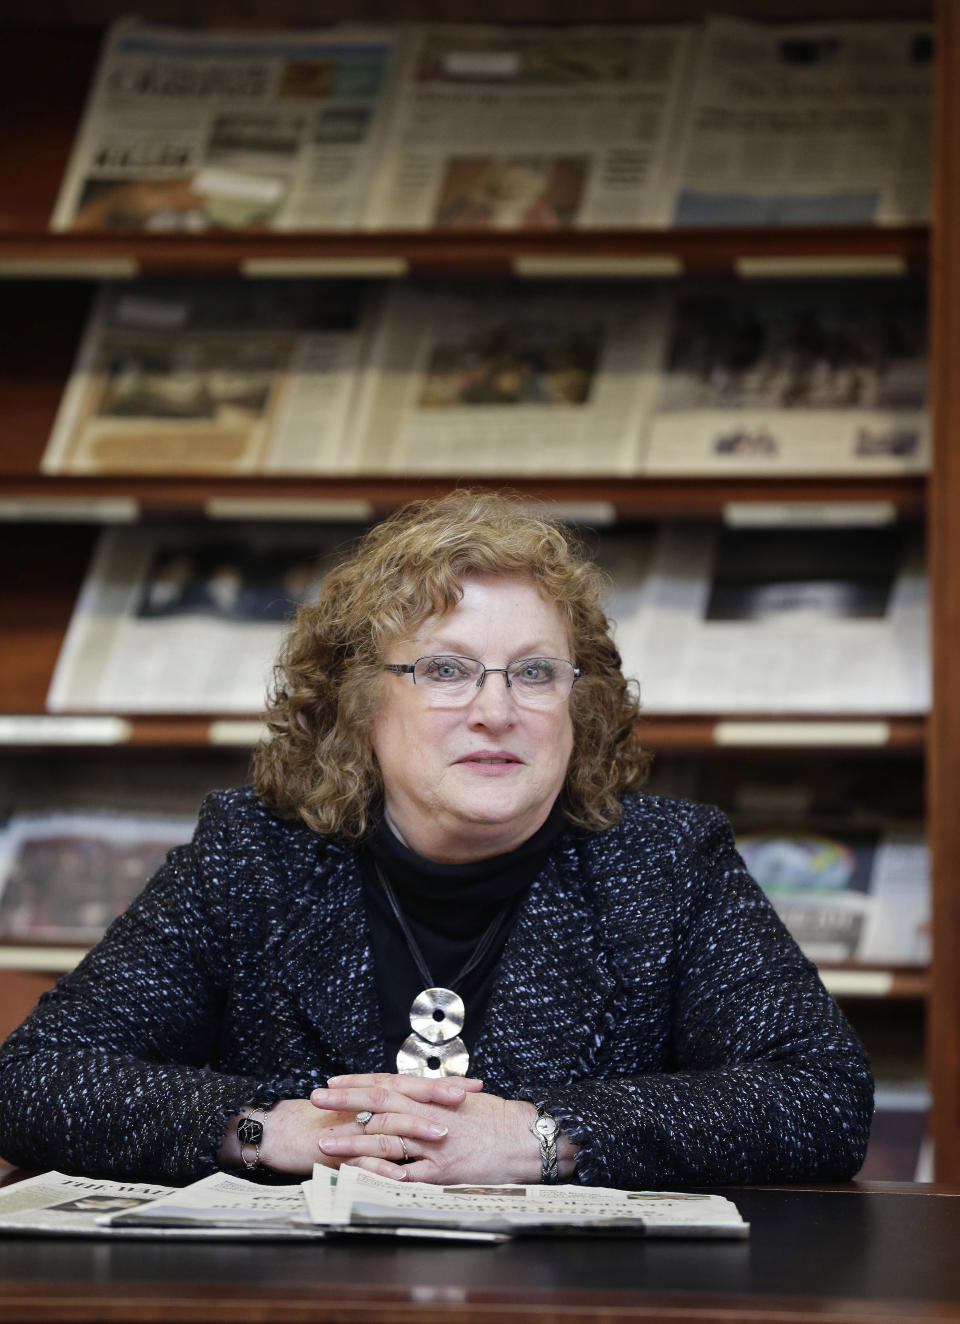 Penelope Muse Abernathy, a University of North Carolina professor, stands with the daily newspaper selection in the Park Library at the School of Journalism in Chapel Hill, N.C., on Thursday, March 7, 2019. "Strong newspapers have been good for democracy, and both educators and informers of a citizenry and its governing officials. They have been problem-solvers," said Abernathy, who studies news industry trends and oversaw the "news desert" report released the previous fall. (AP Photo/Gerry Broome)